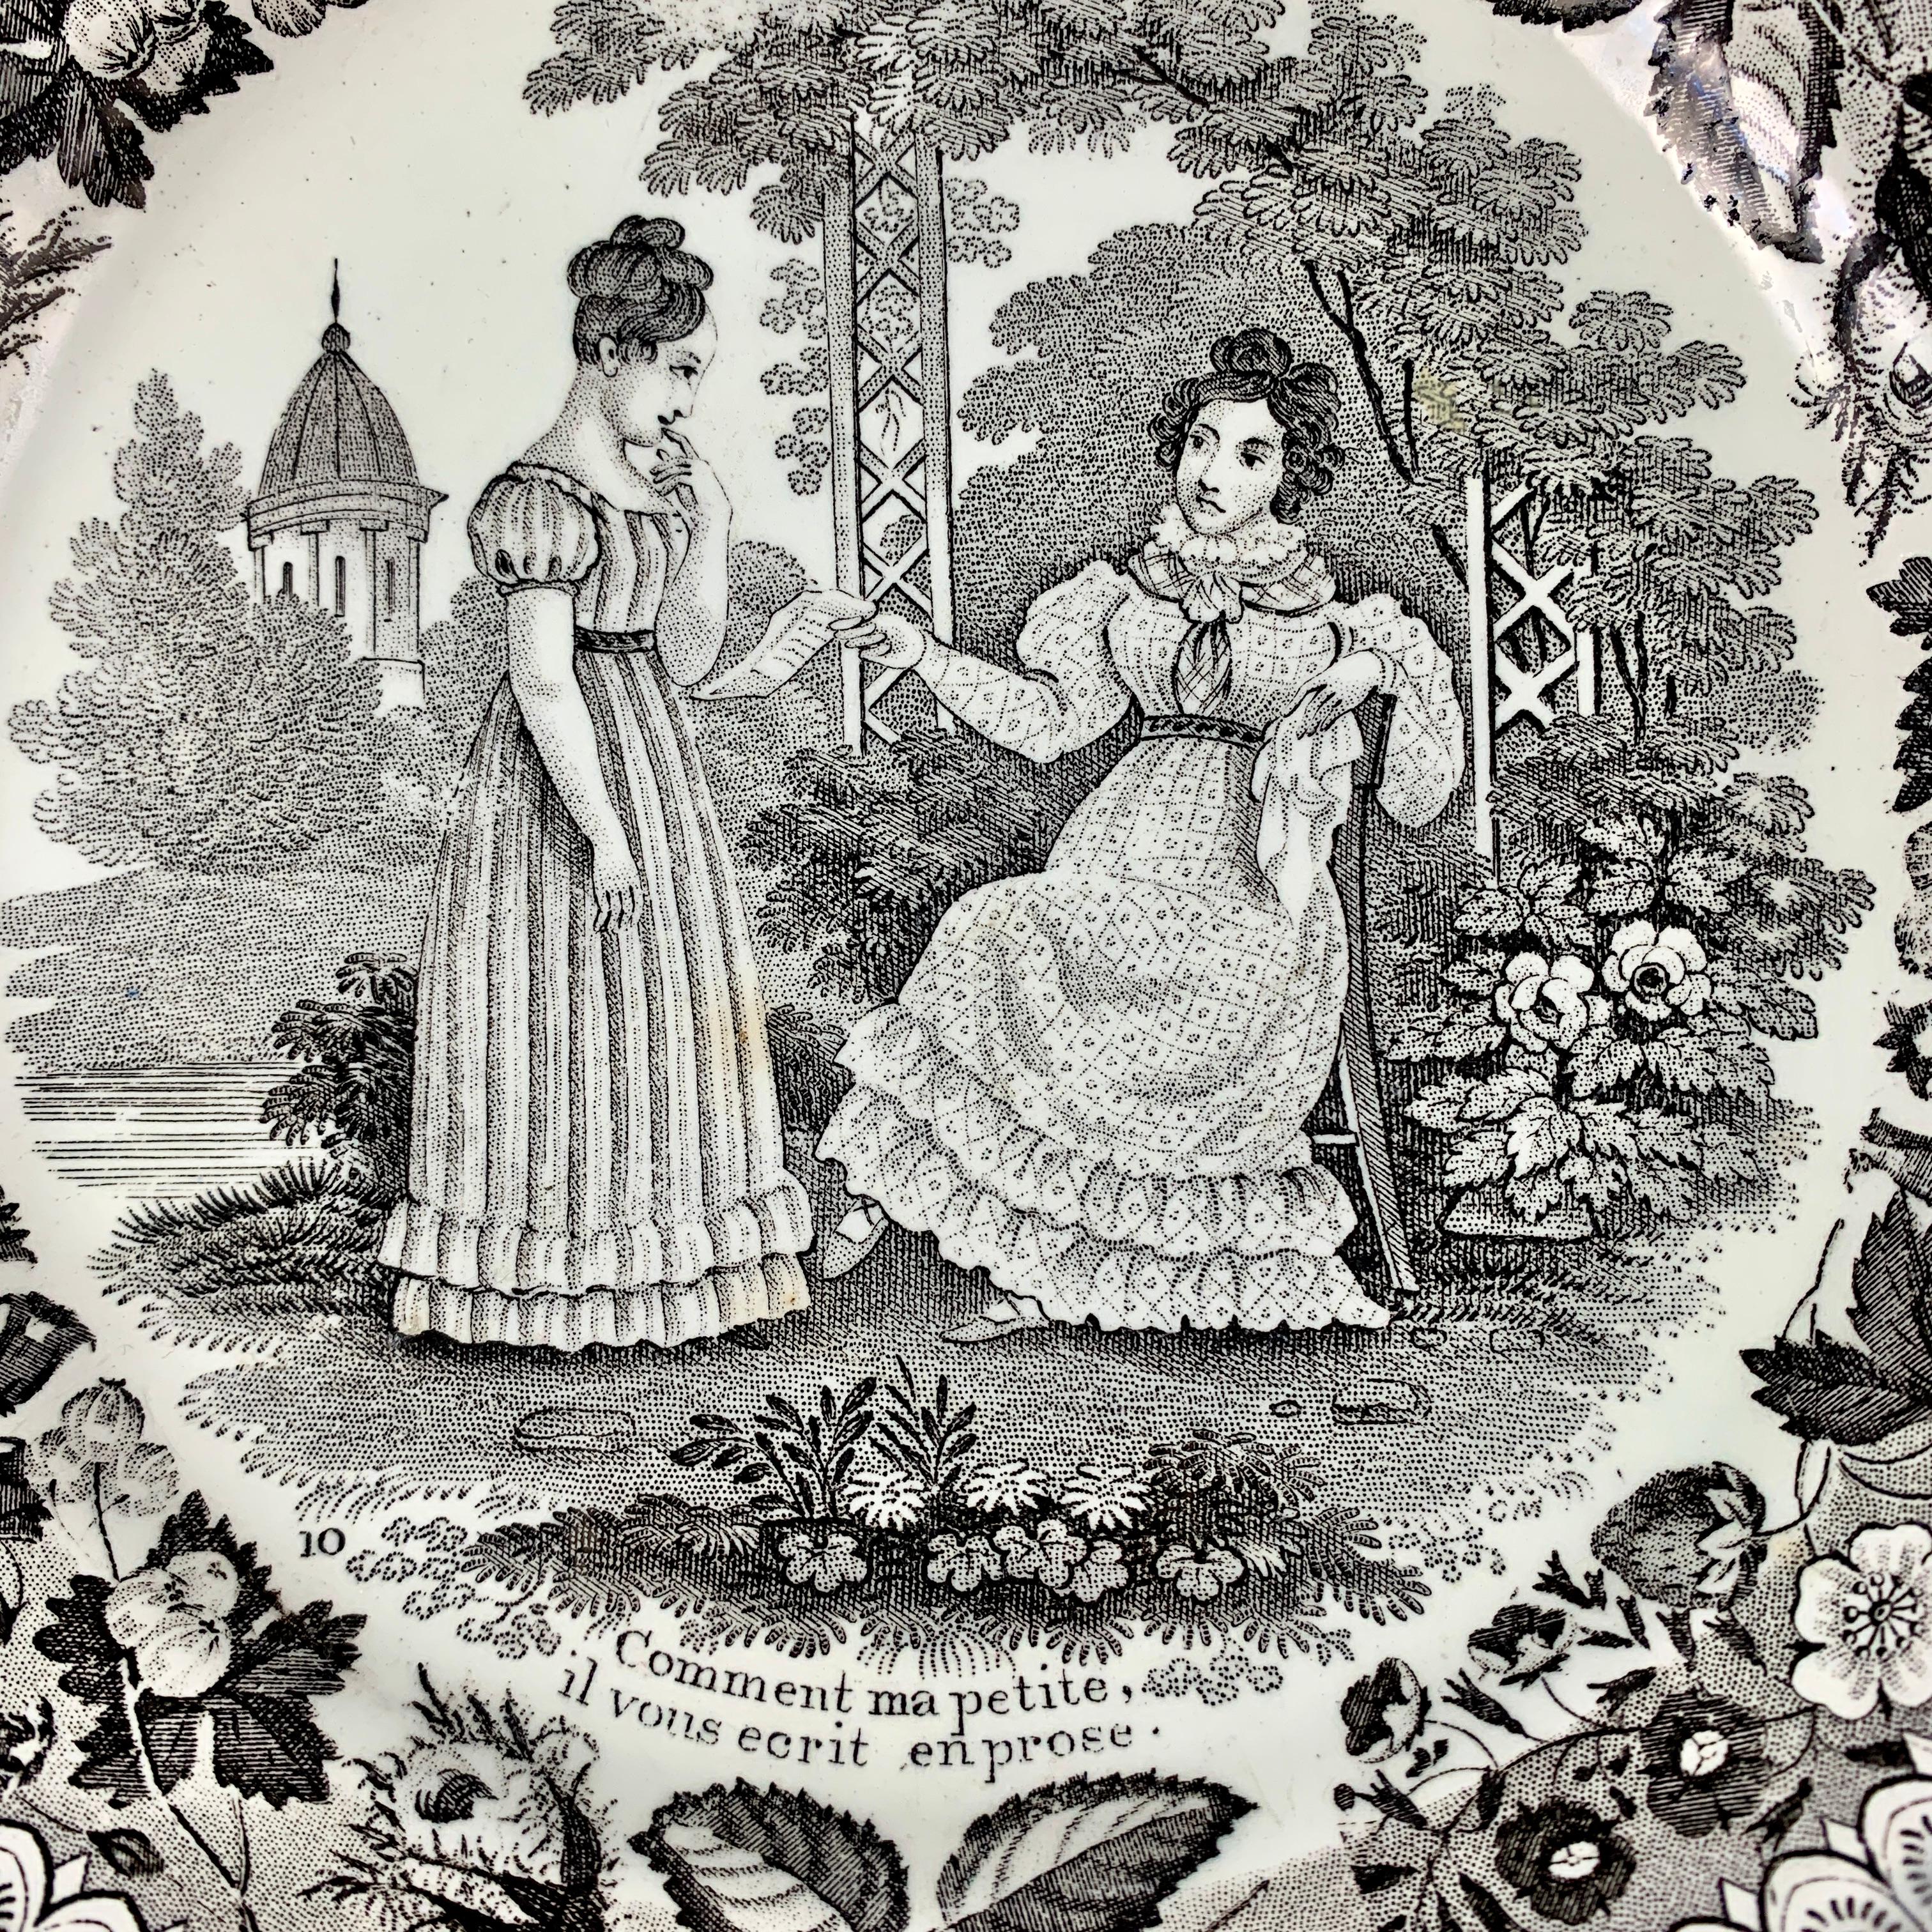 A French faïence transfer printed creamware “assiette parlante” or talking plate, produced by P&H Choisy, Seine, France – circa 1824-1836.

The title, “Comment ma petite, il vous ecrit en prose” translates to ‘How my little one, he writes to you